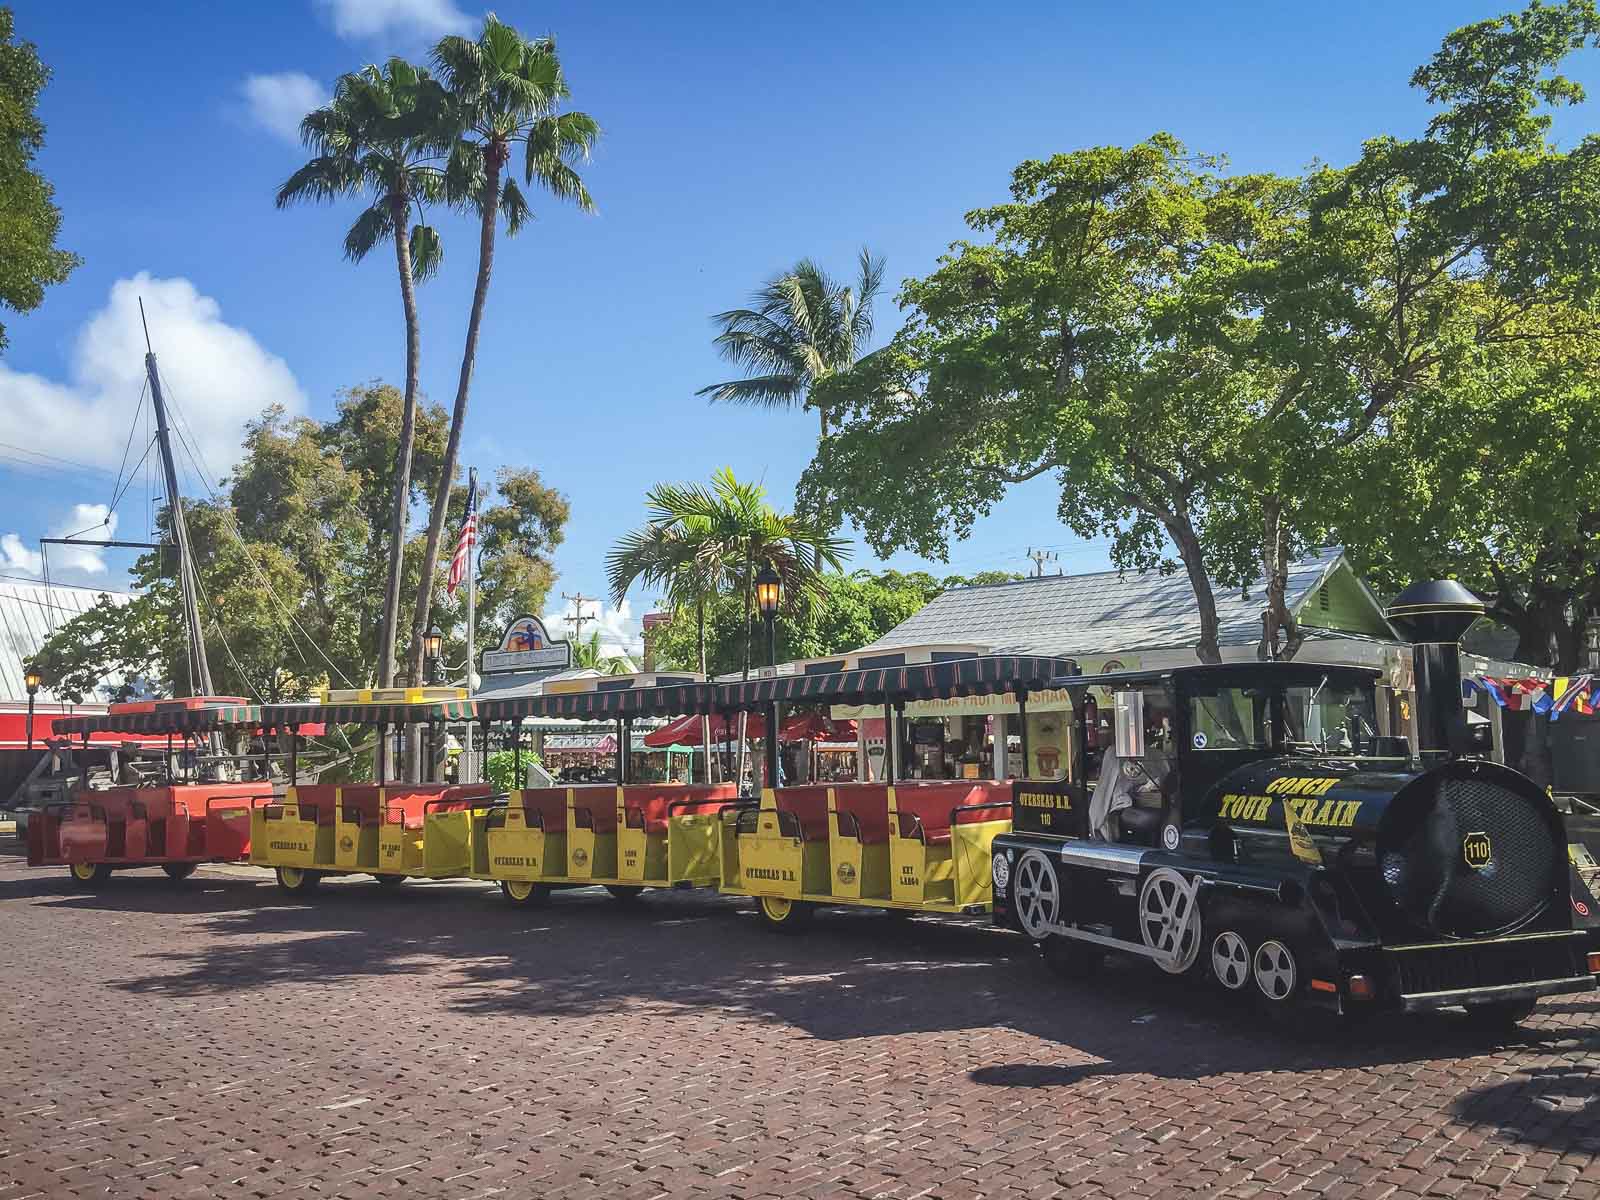 Ride the Conch tour Train in Key West Florida 